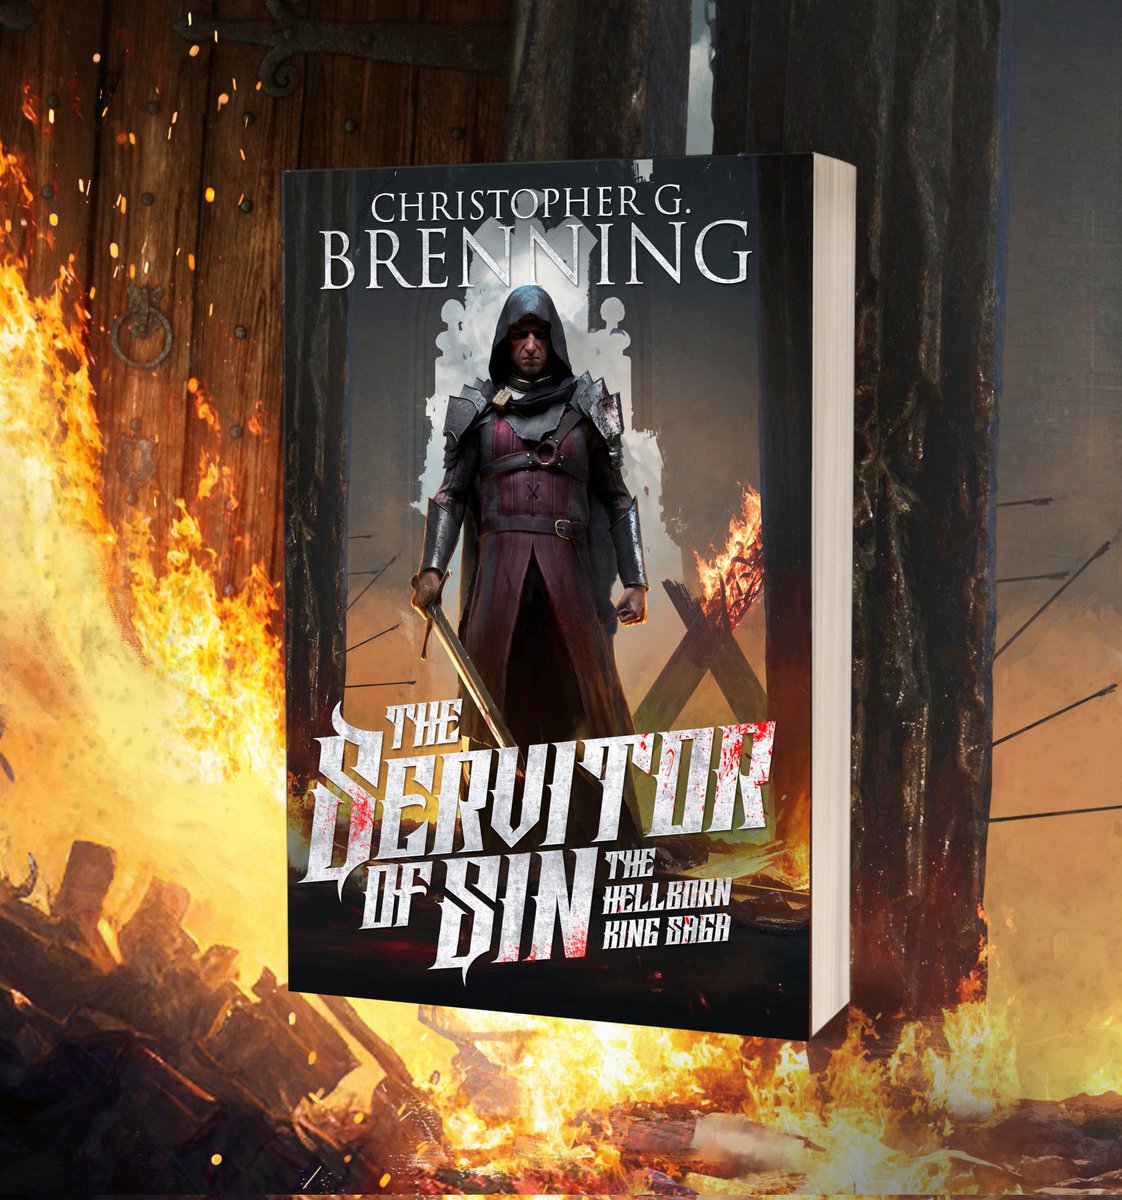 I'm looking for more reviewers who have read The Hellborn King who are interested in a free e-ARC. This one comes out July 10th! #epicfantasy #fantasybooks #grimdark #AuthorsOfTwitter #BookTwitter #freebook #selfpublishing #BookReview